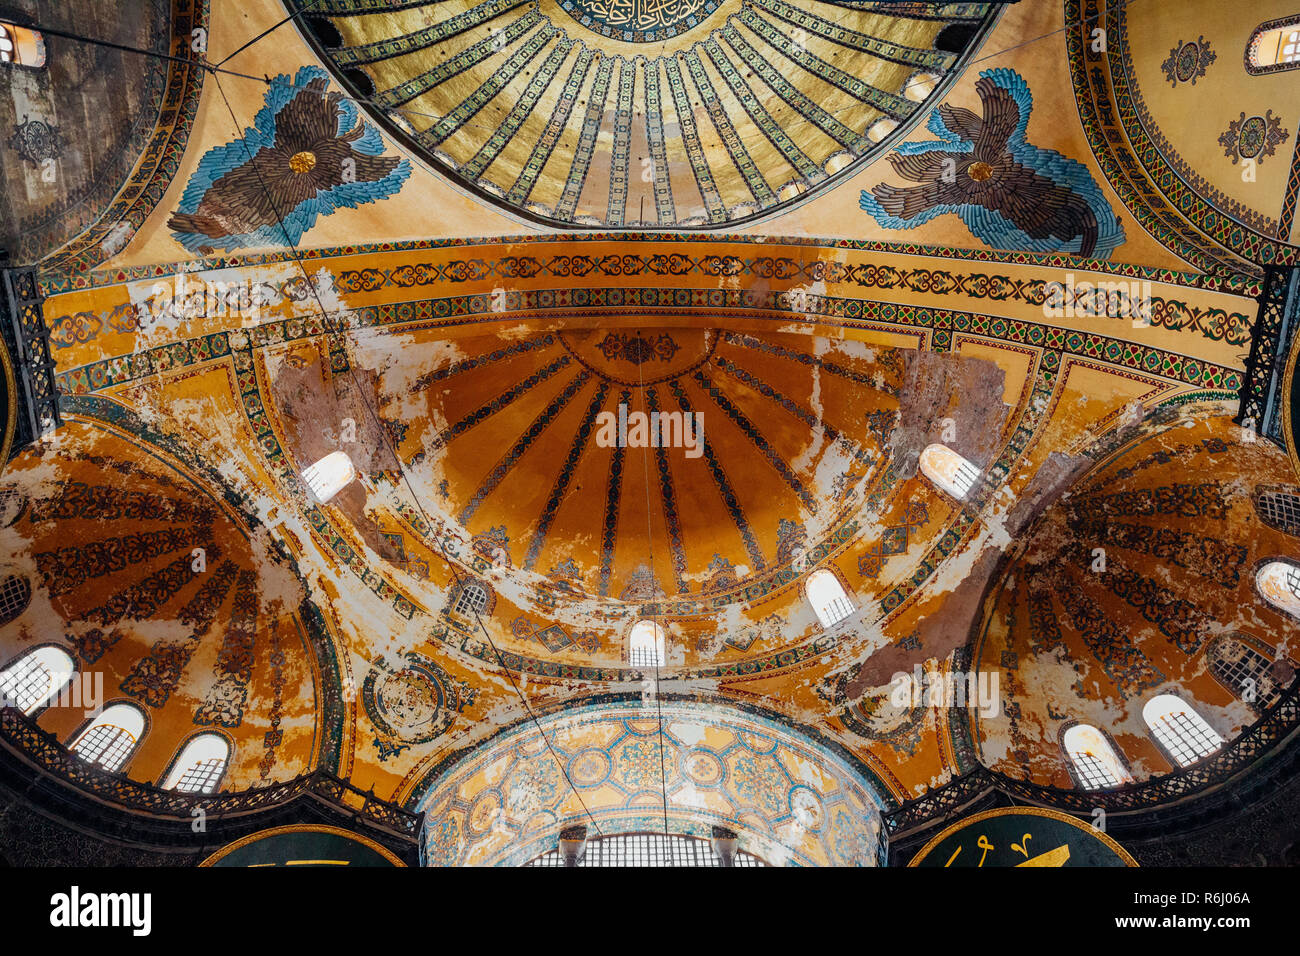 Istanbul, Turkey - August 14, 2018: The dome (ceiling) decoration of the Hagia Sophia Museum, view from inside the temple on August 14, 2018, in Istan Stock Photo